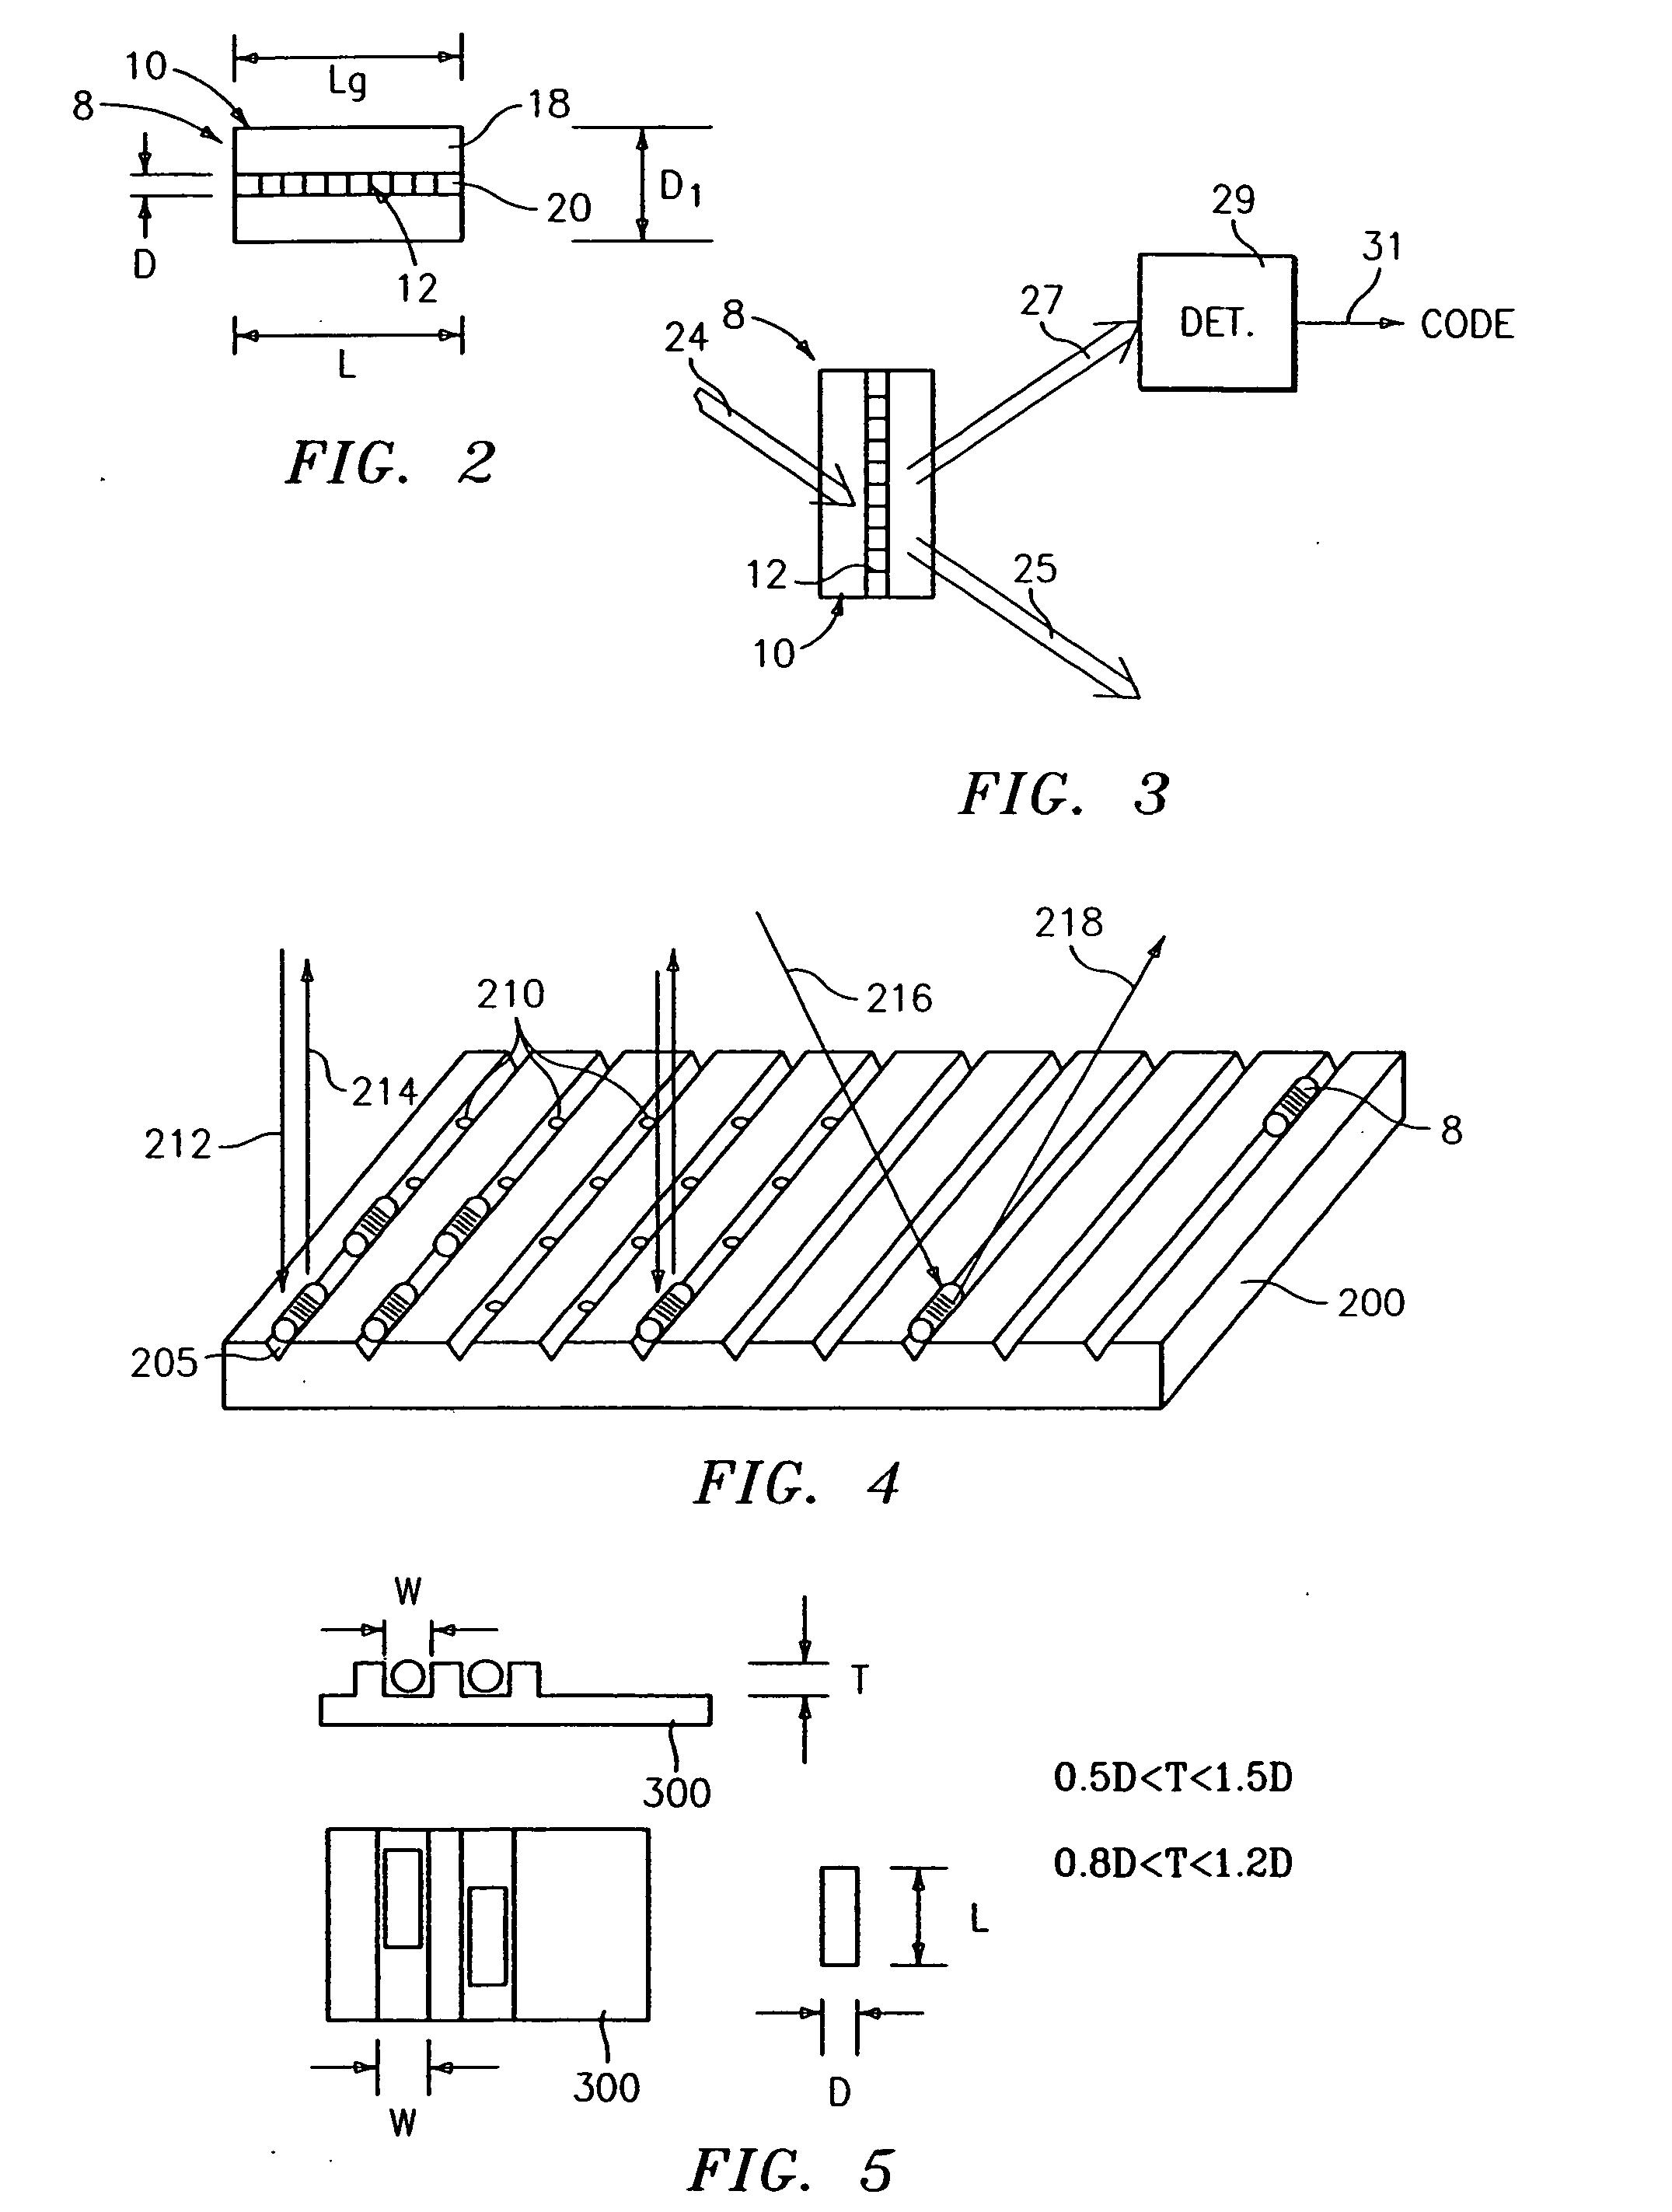 Multi-well plate with alignment grooves for encoded microparticles